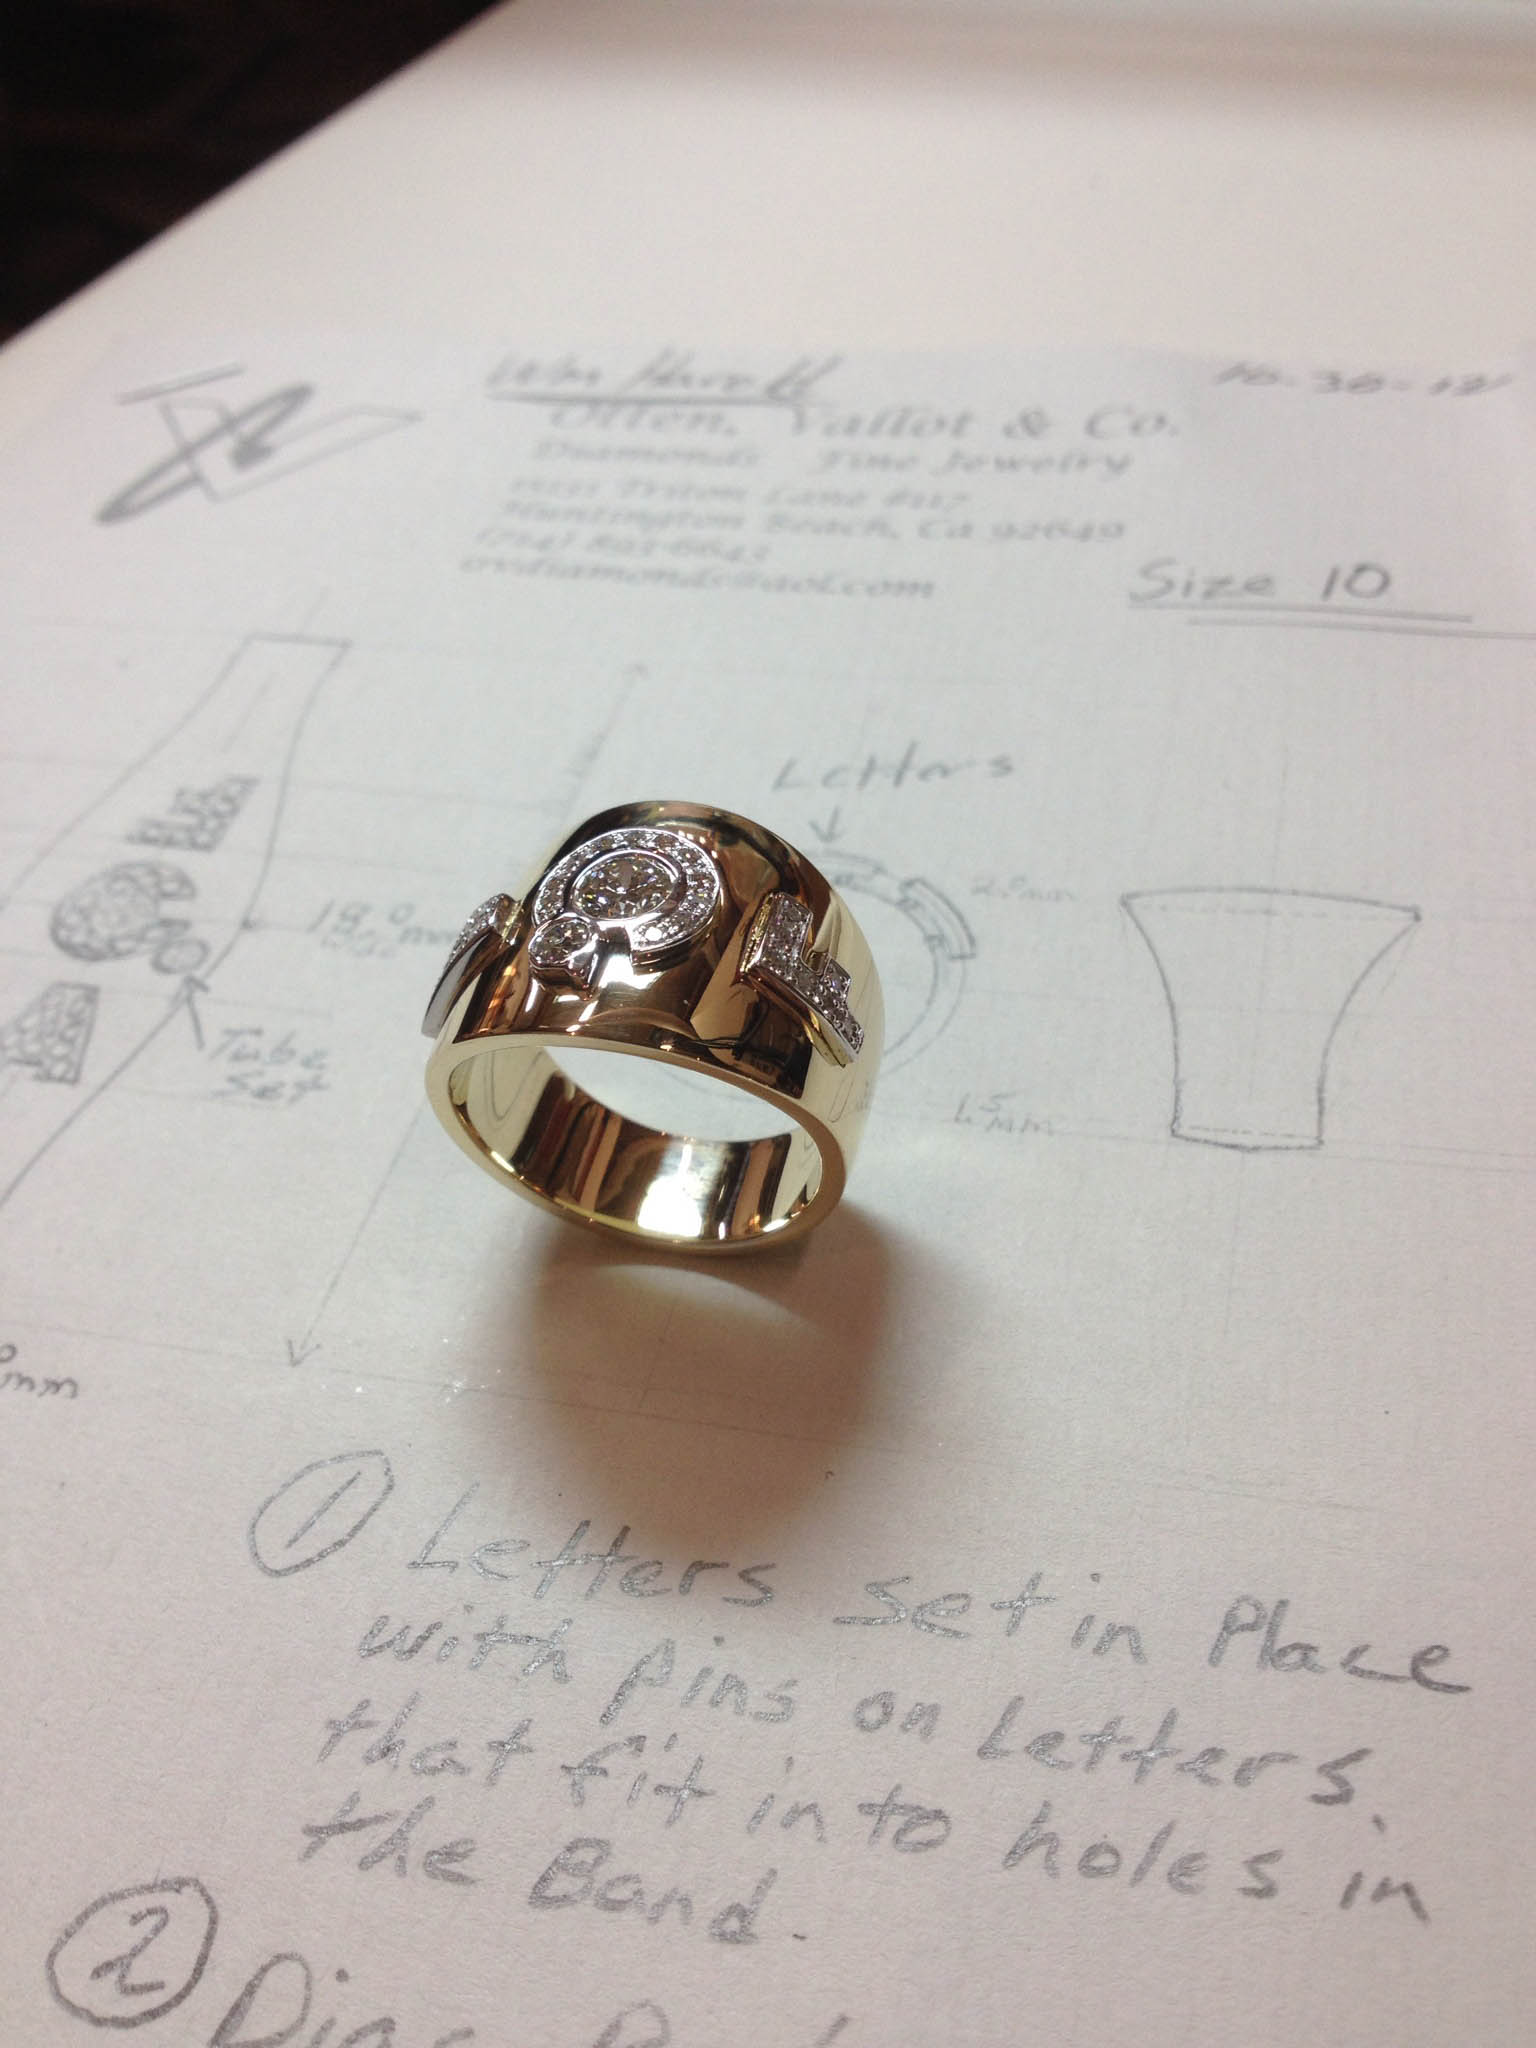 Finished Ring with Sketch